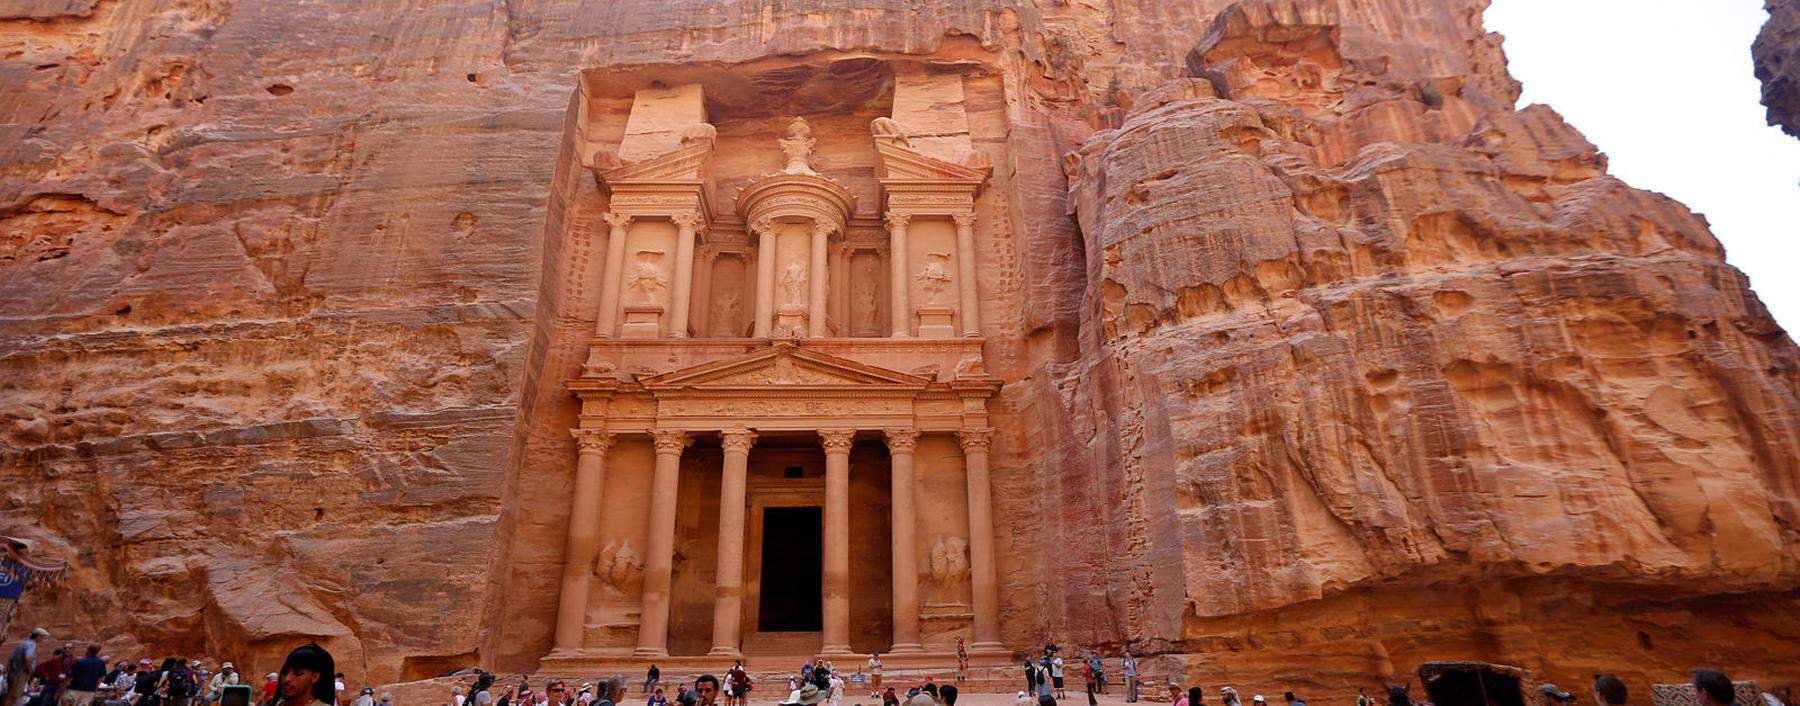 Tourists take pictures in front of the treasury site in the ancient city of Petra, south of Amman